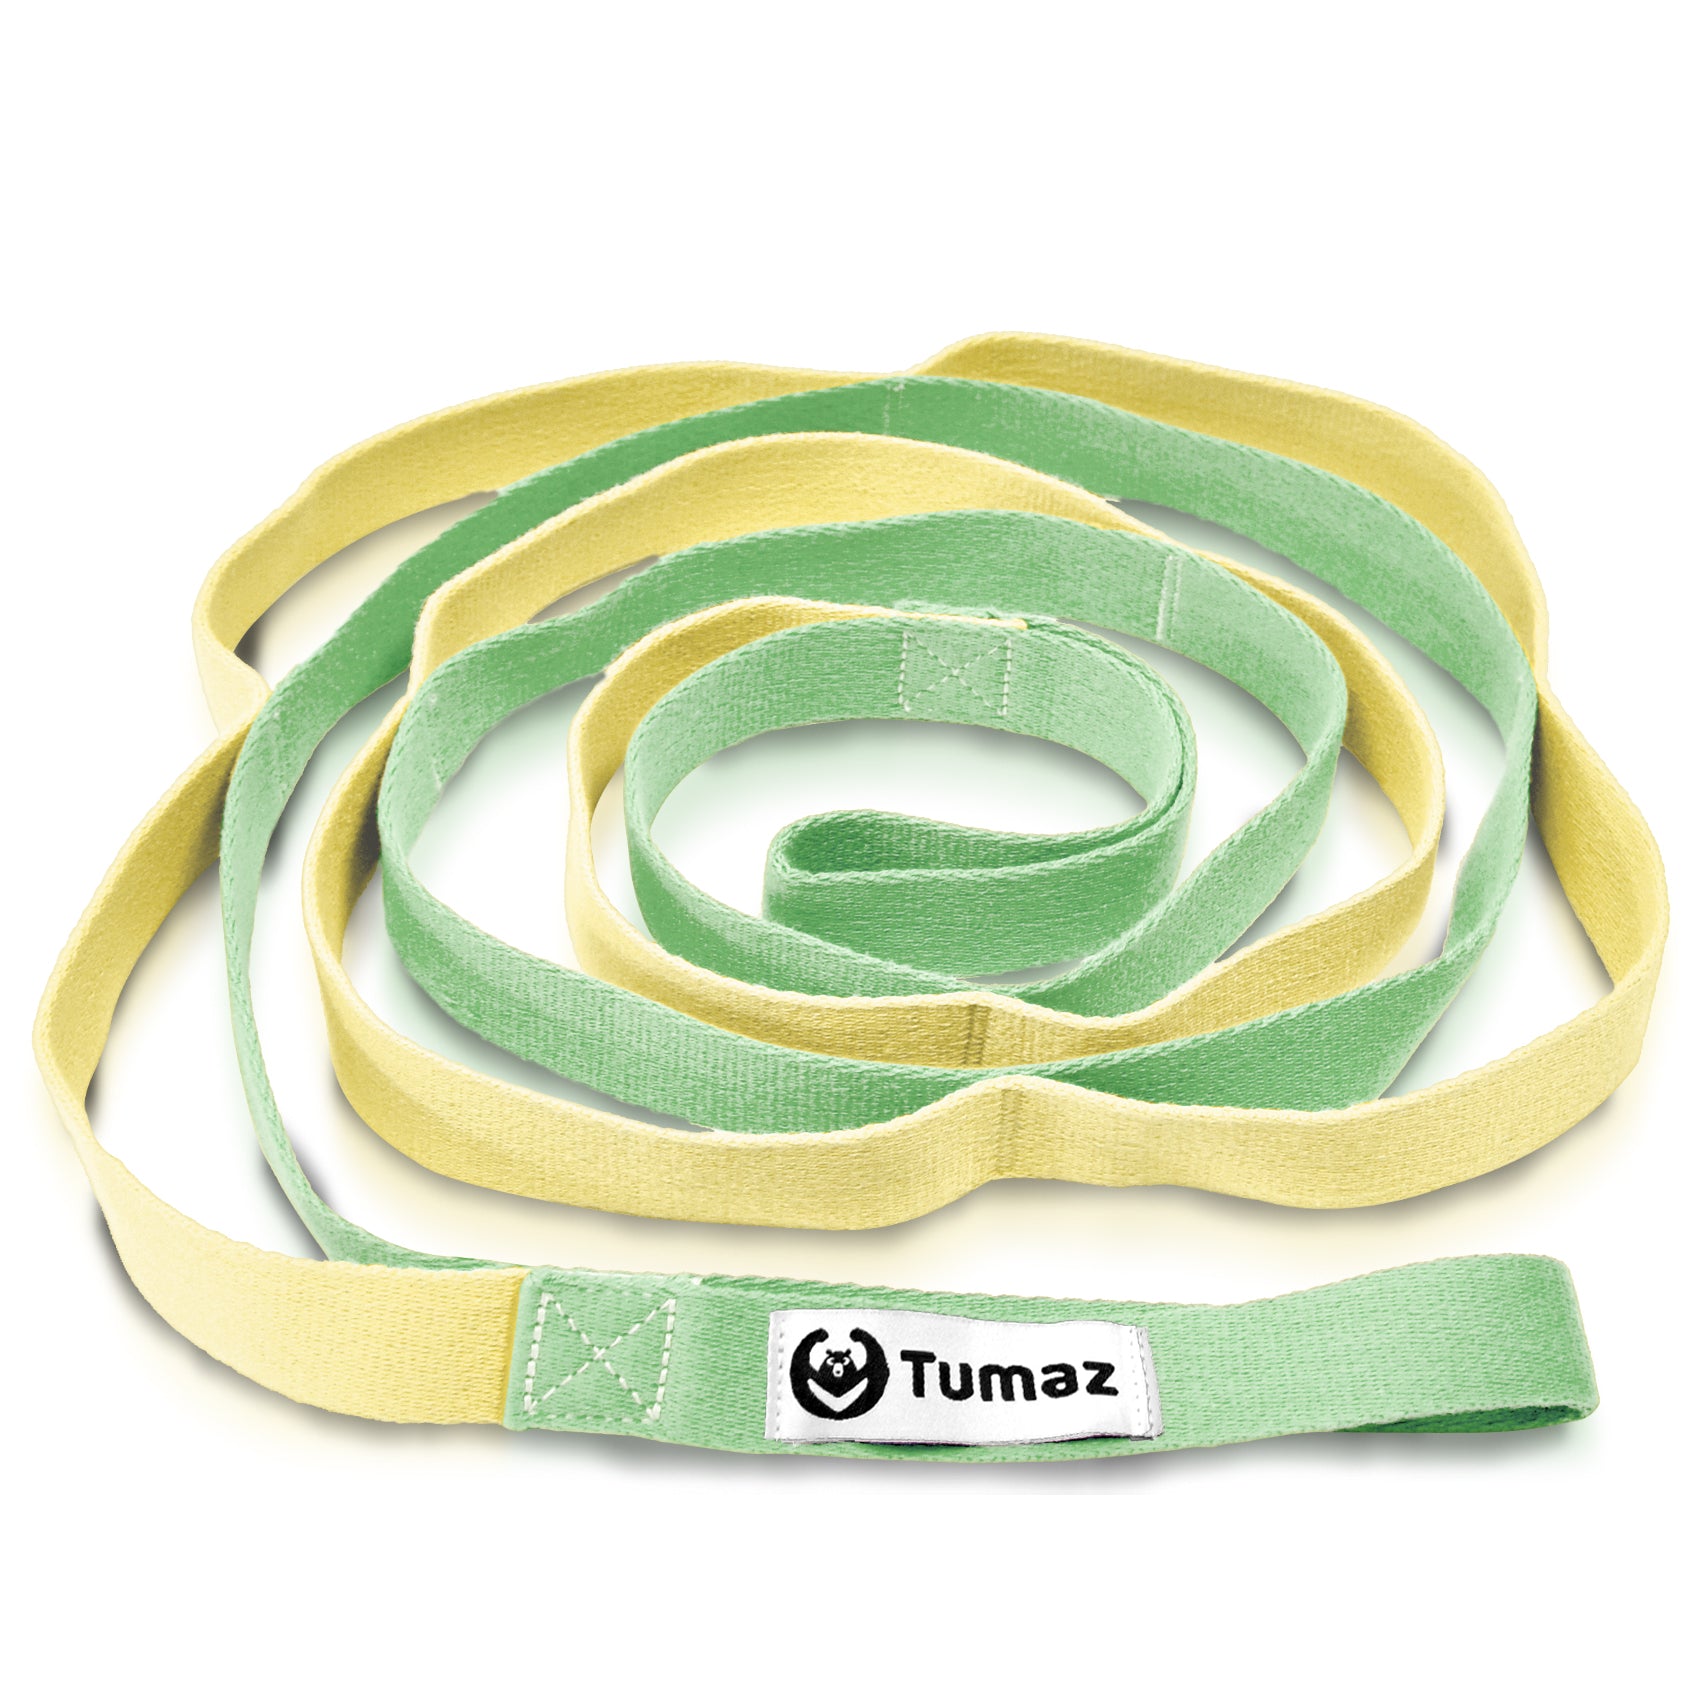 Tumaz Stretching Strap - 10 Loops & Non-Elastic Yoga Strap - The Perfect  Home Workout Stretch Strap for Physical Therapy, Yoga, Pilates, Flexibility  - Extra Thick, Durable, Soft Number Version Multi-Loop c.